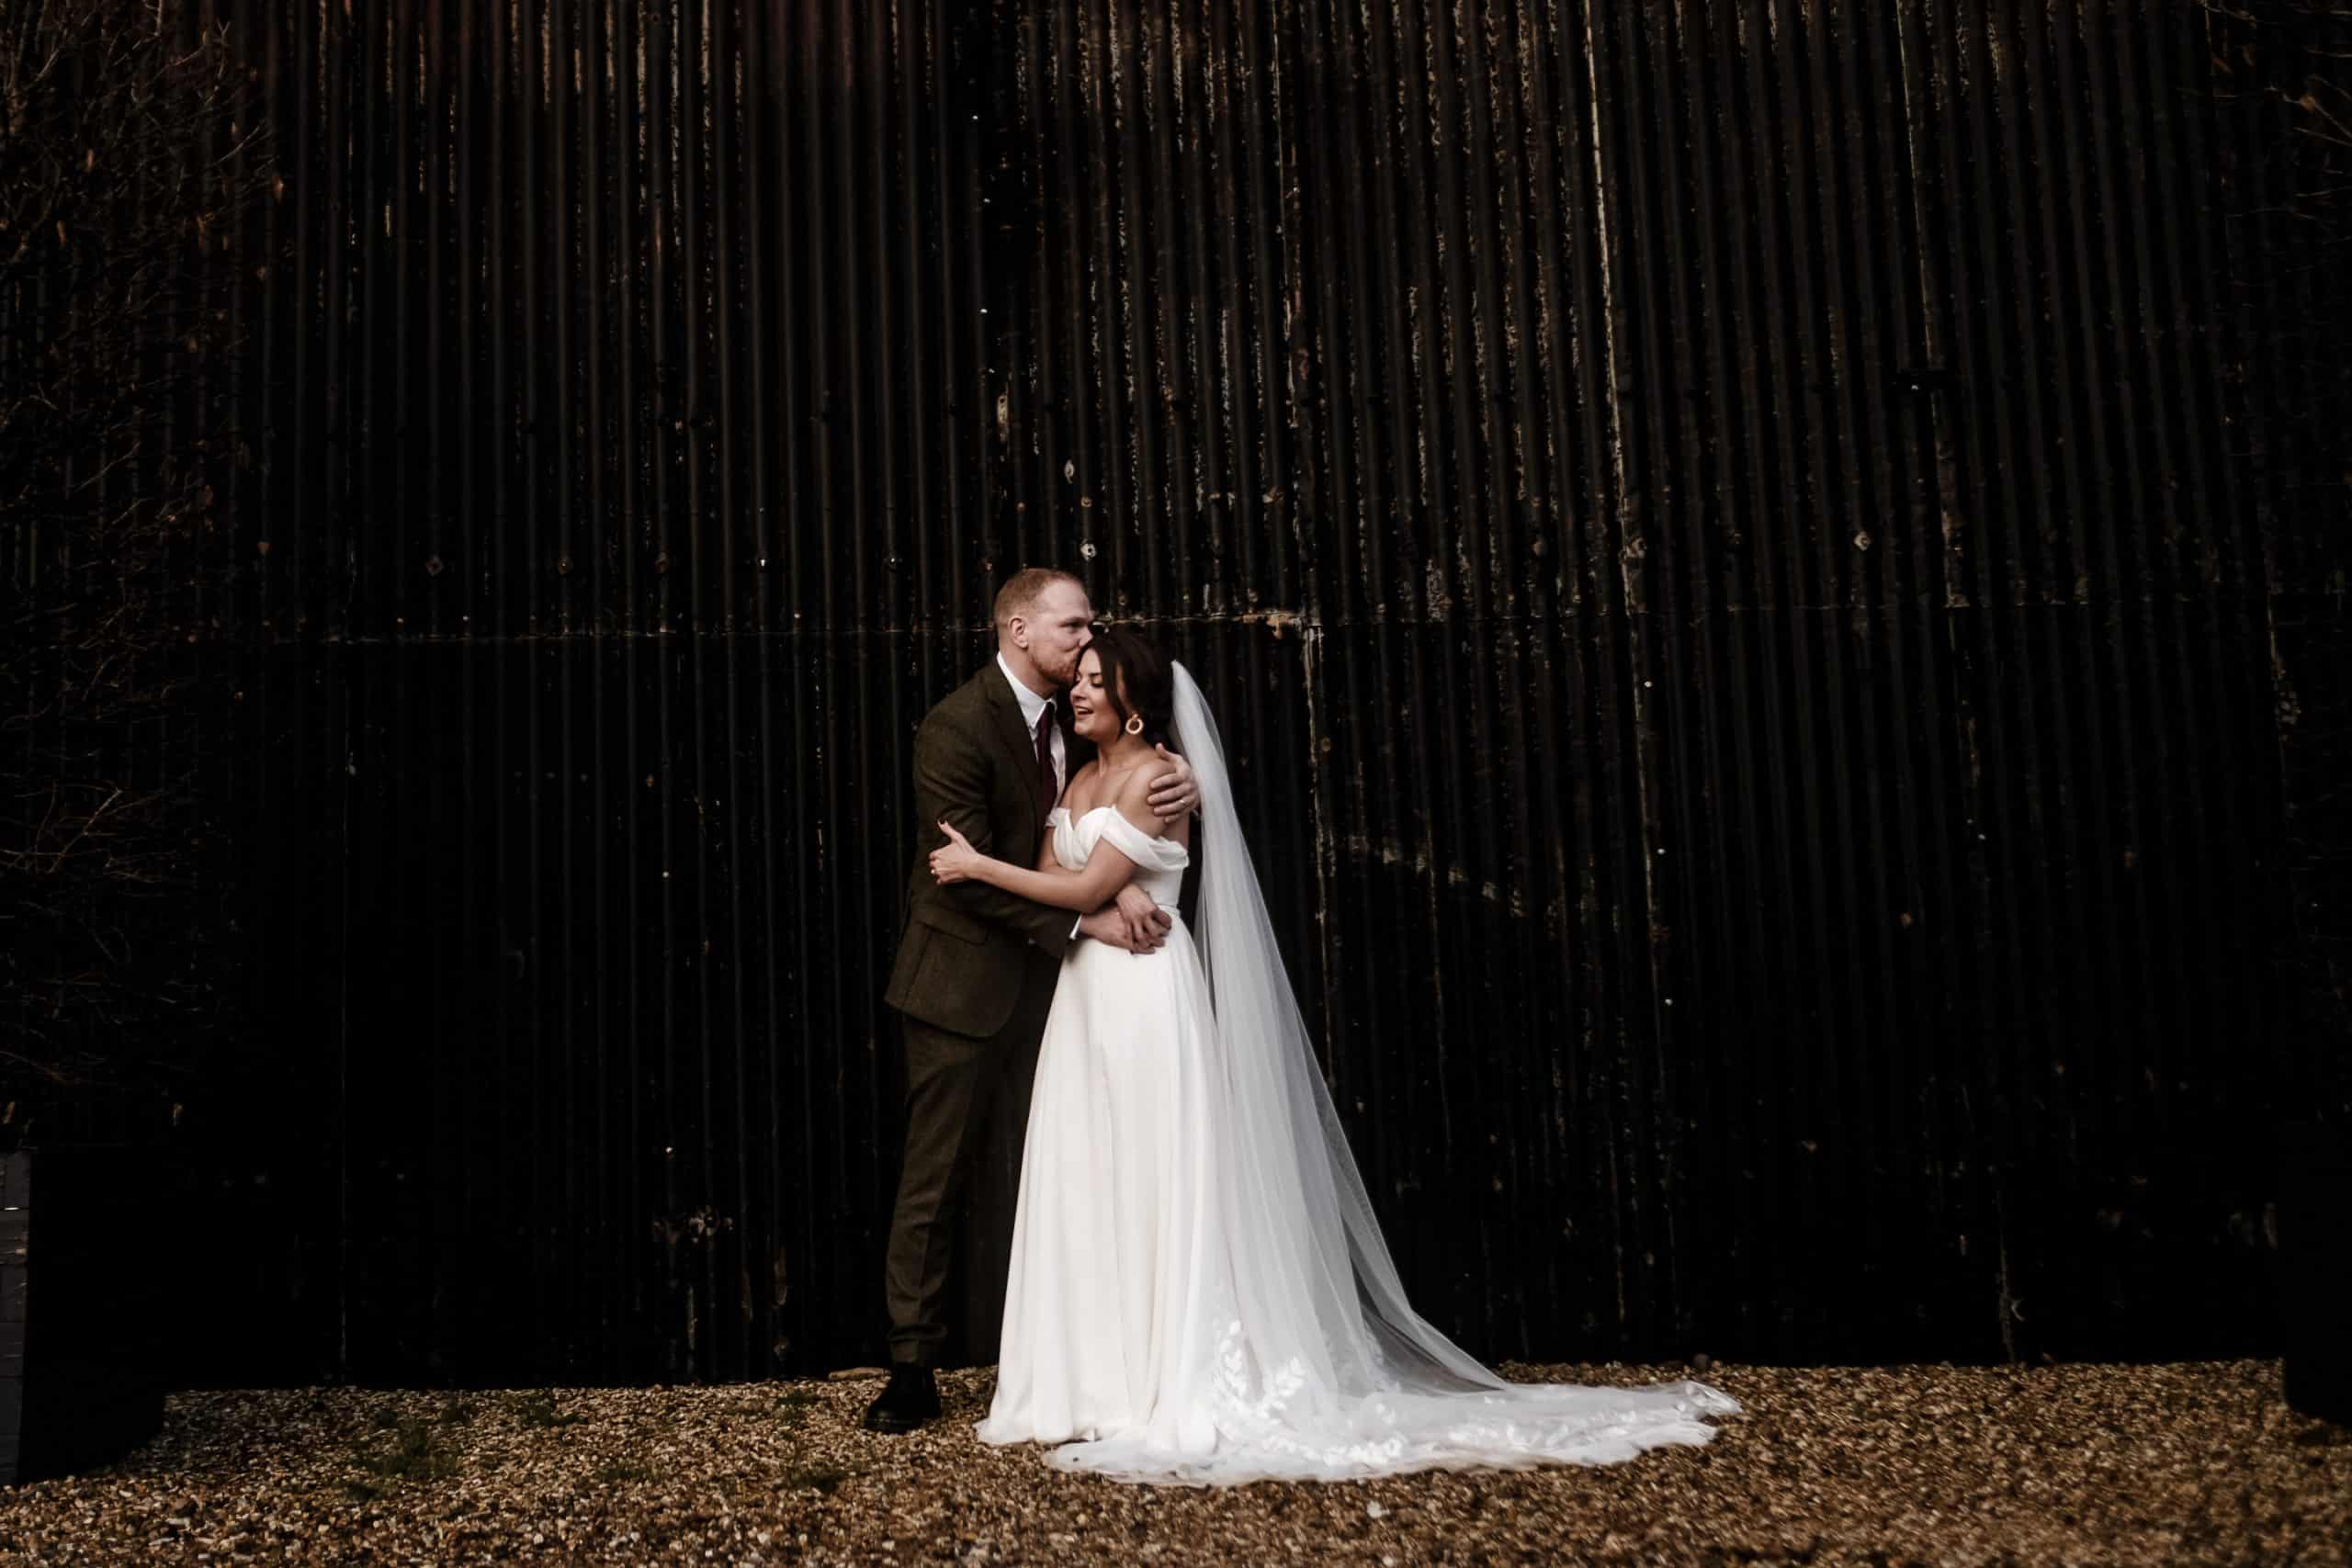 Couples portrait at Cripps barn